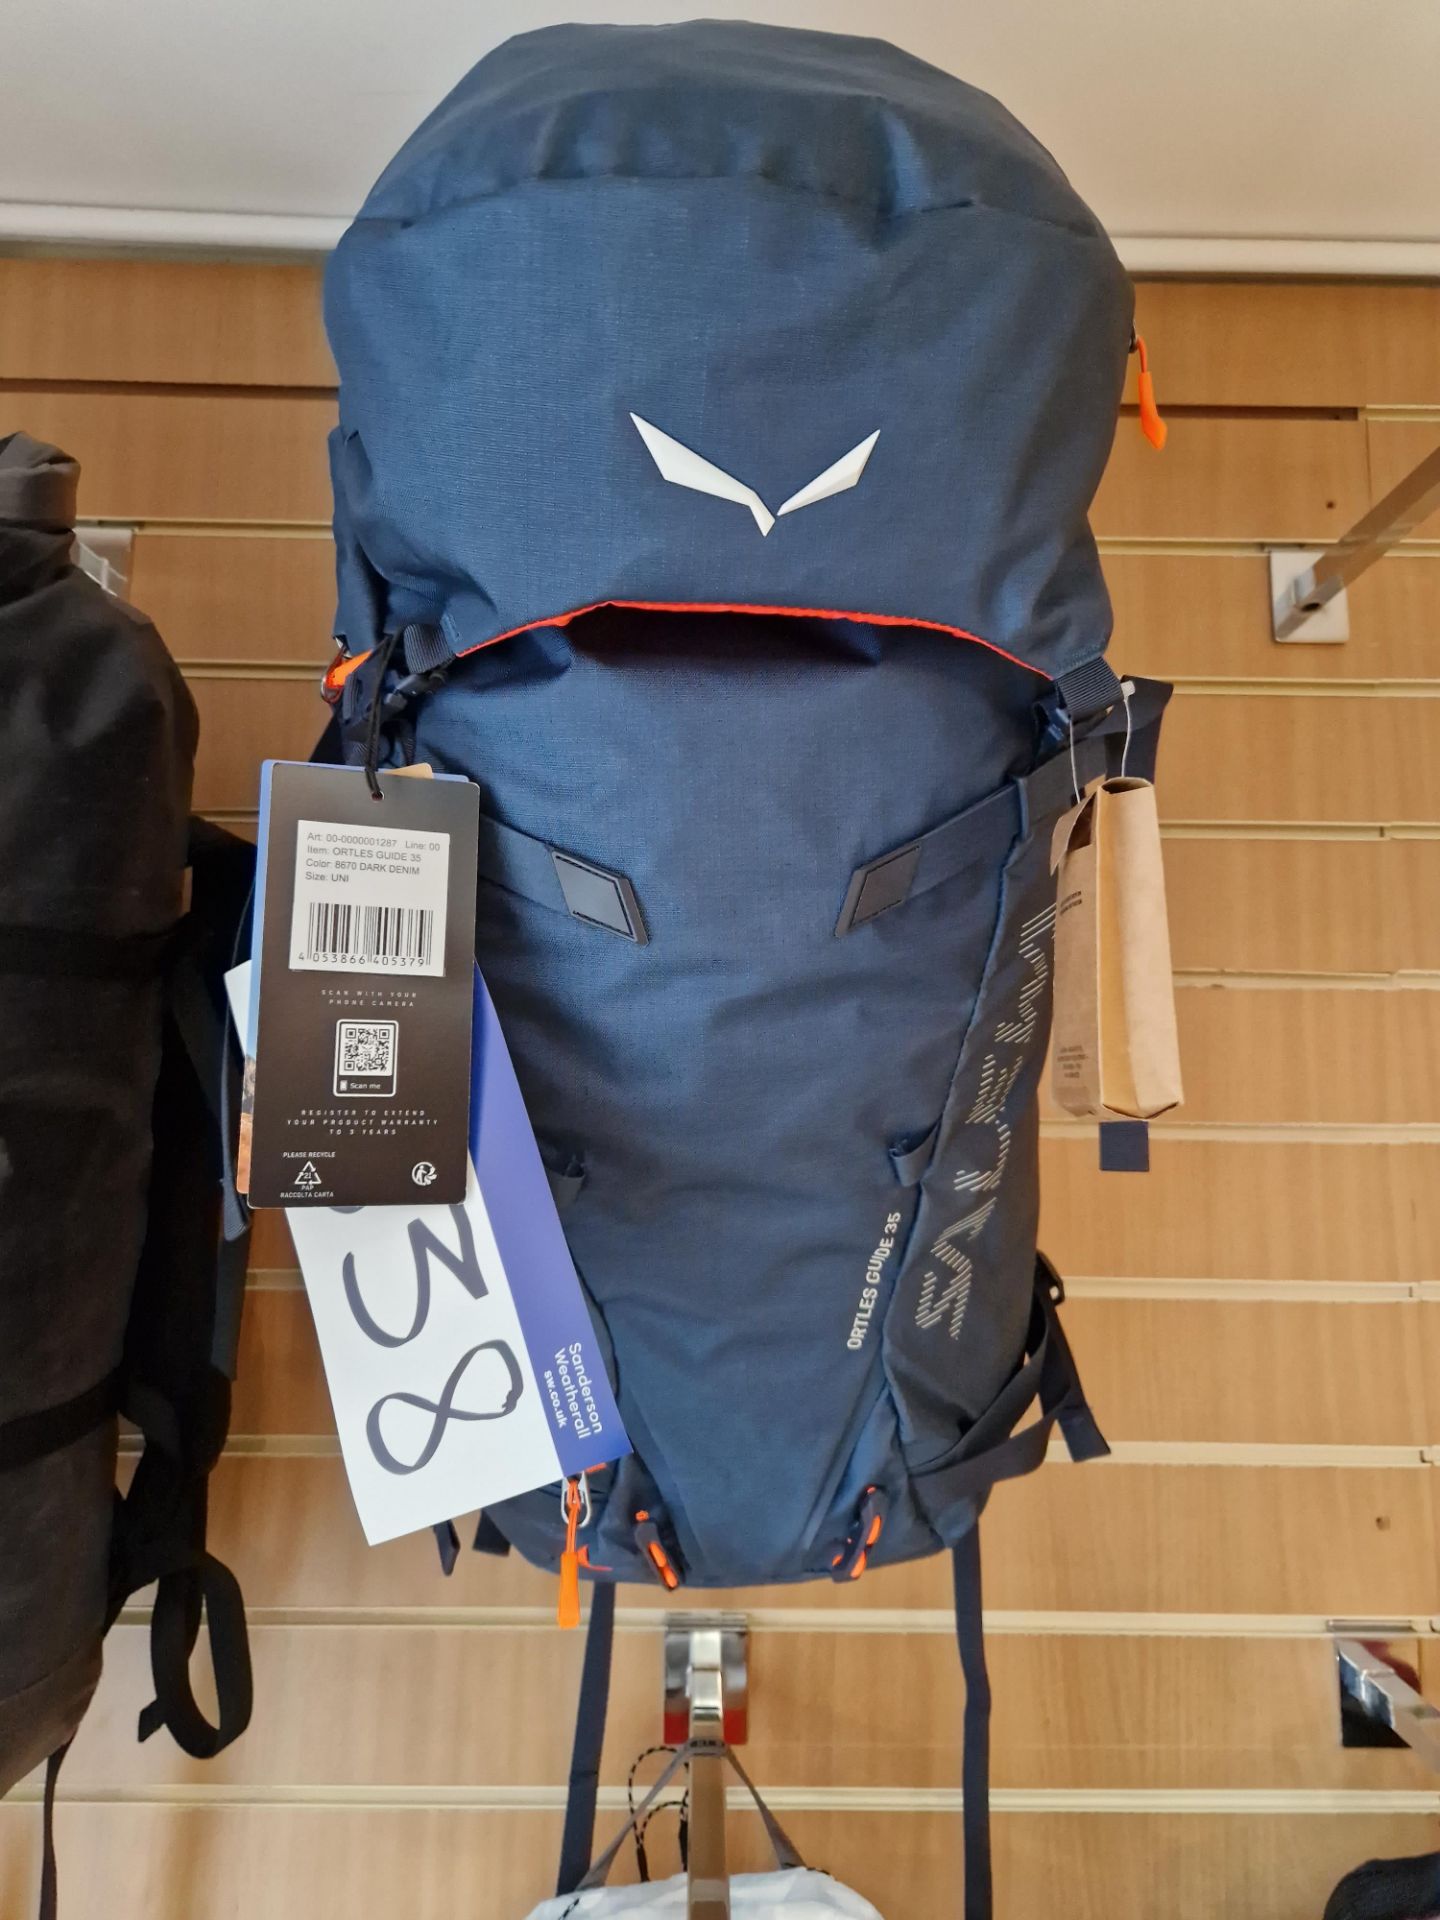 Salewa Ortles Guide 35 Backpack, Colour: Dark Denim, Size: Uni Please read the following important